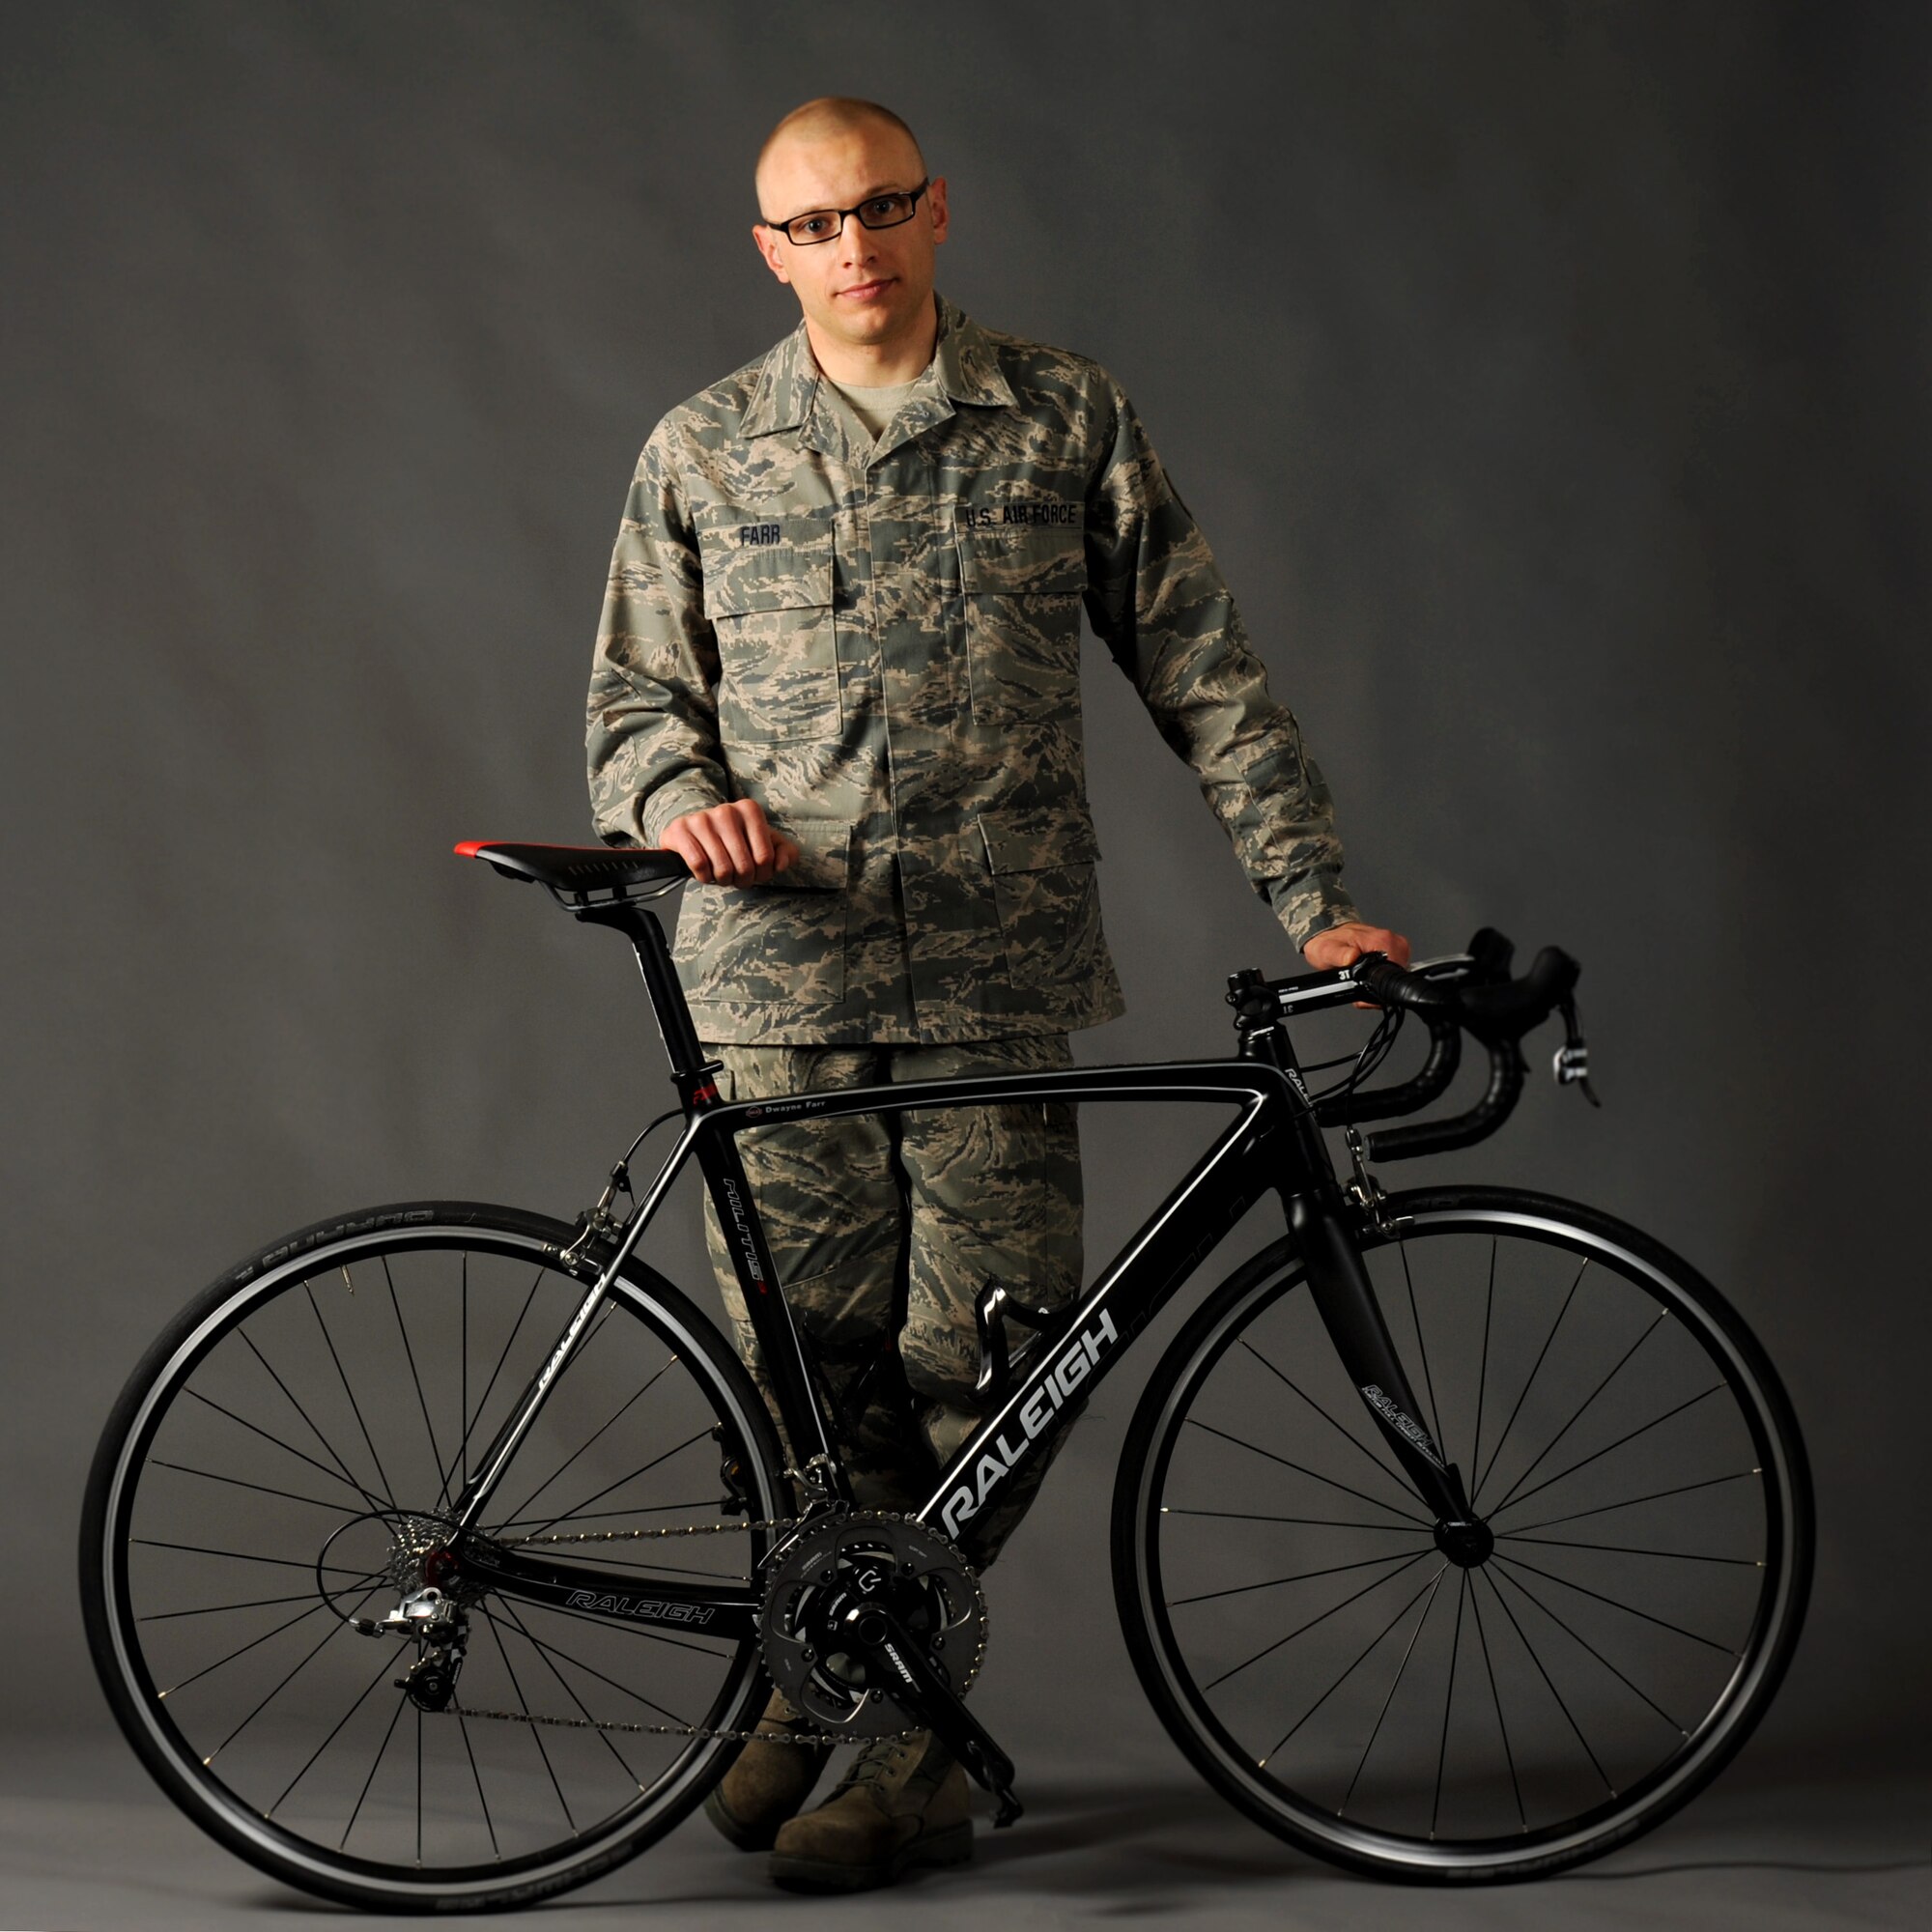 Tech. Sgt. Dwayne Farr, assigned to the Oregon Air National Guard’s 142nd Aircraft Maintenance Squadron, poses with one of his bicycles on Portland Air National Guard Base, Ore., April 7, 2013. Farr has been training and racing as an endurance cyclist during the past four years and was part of the Military World Games in Mungyeoung, South Korea, Oct. 6, 2015. (U.S. Air National Guard photo/Tech. Sgt. John Hughel)